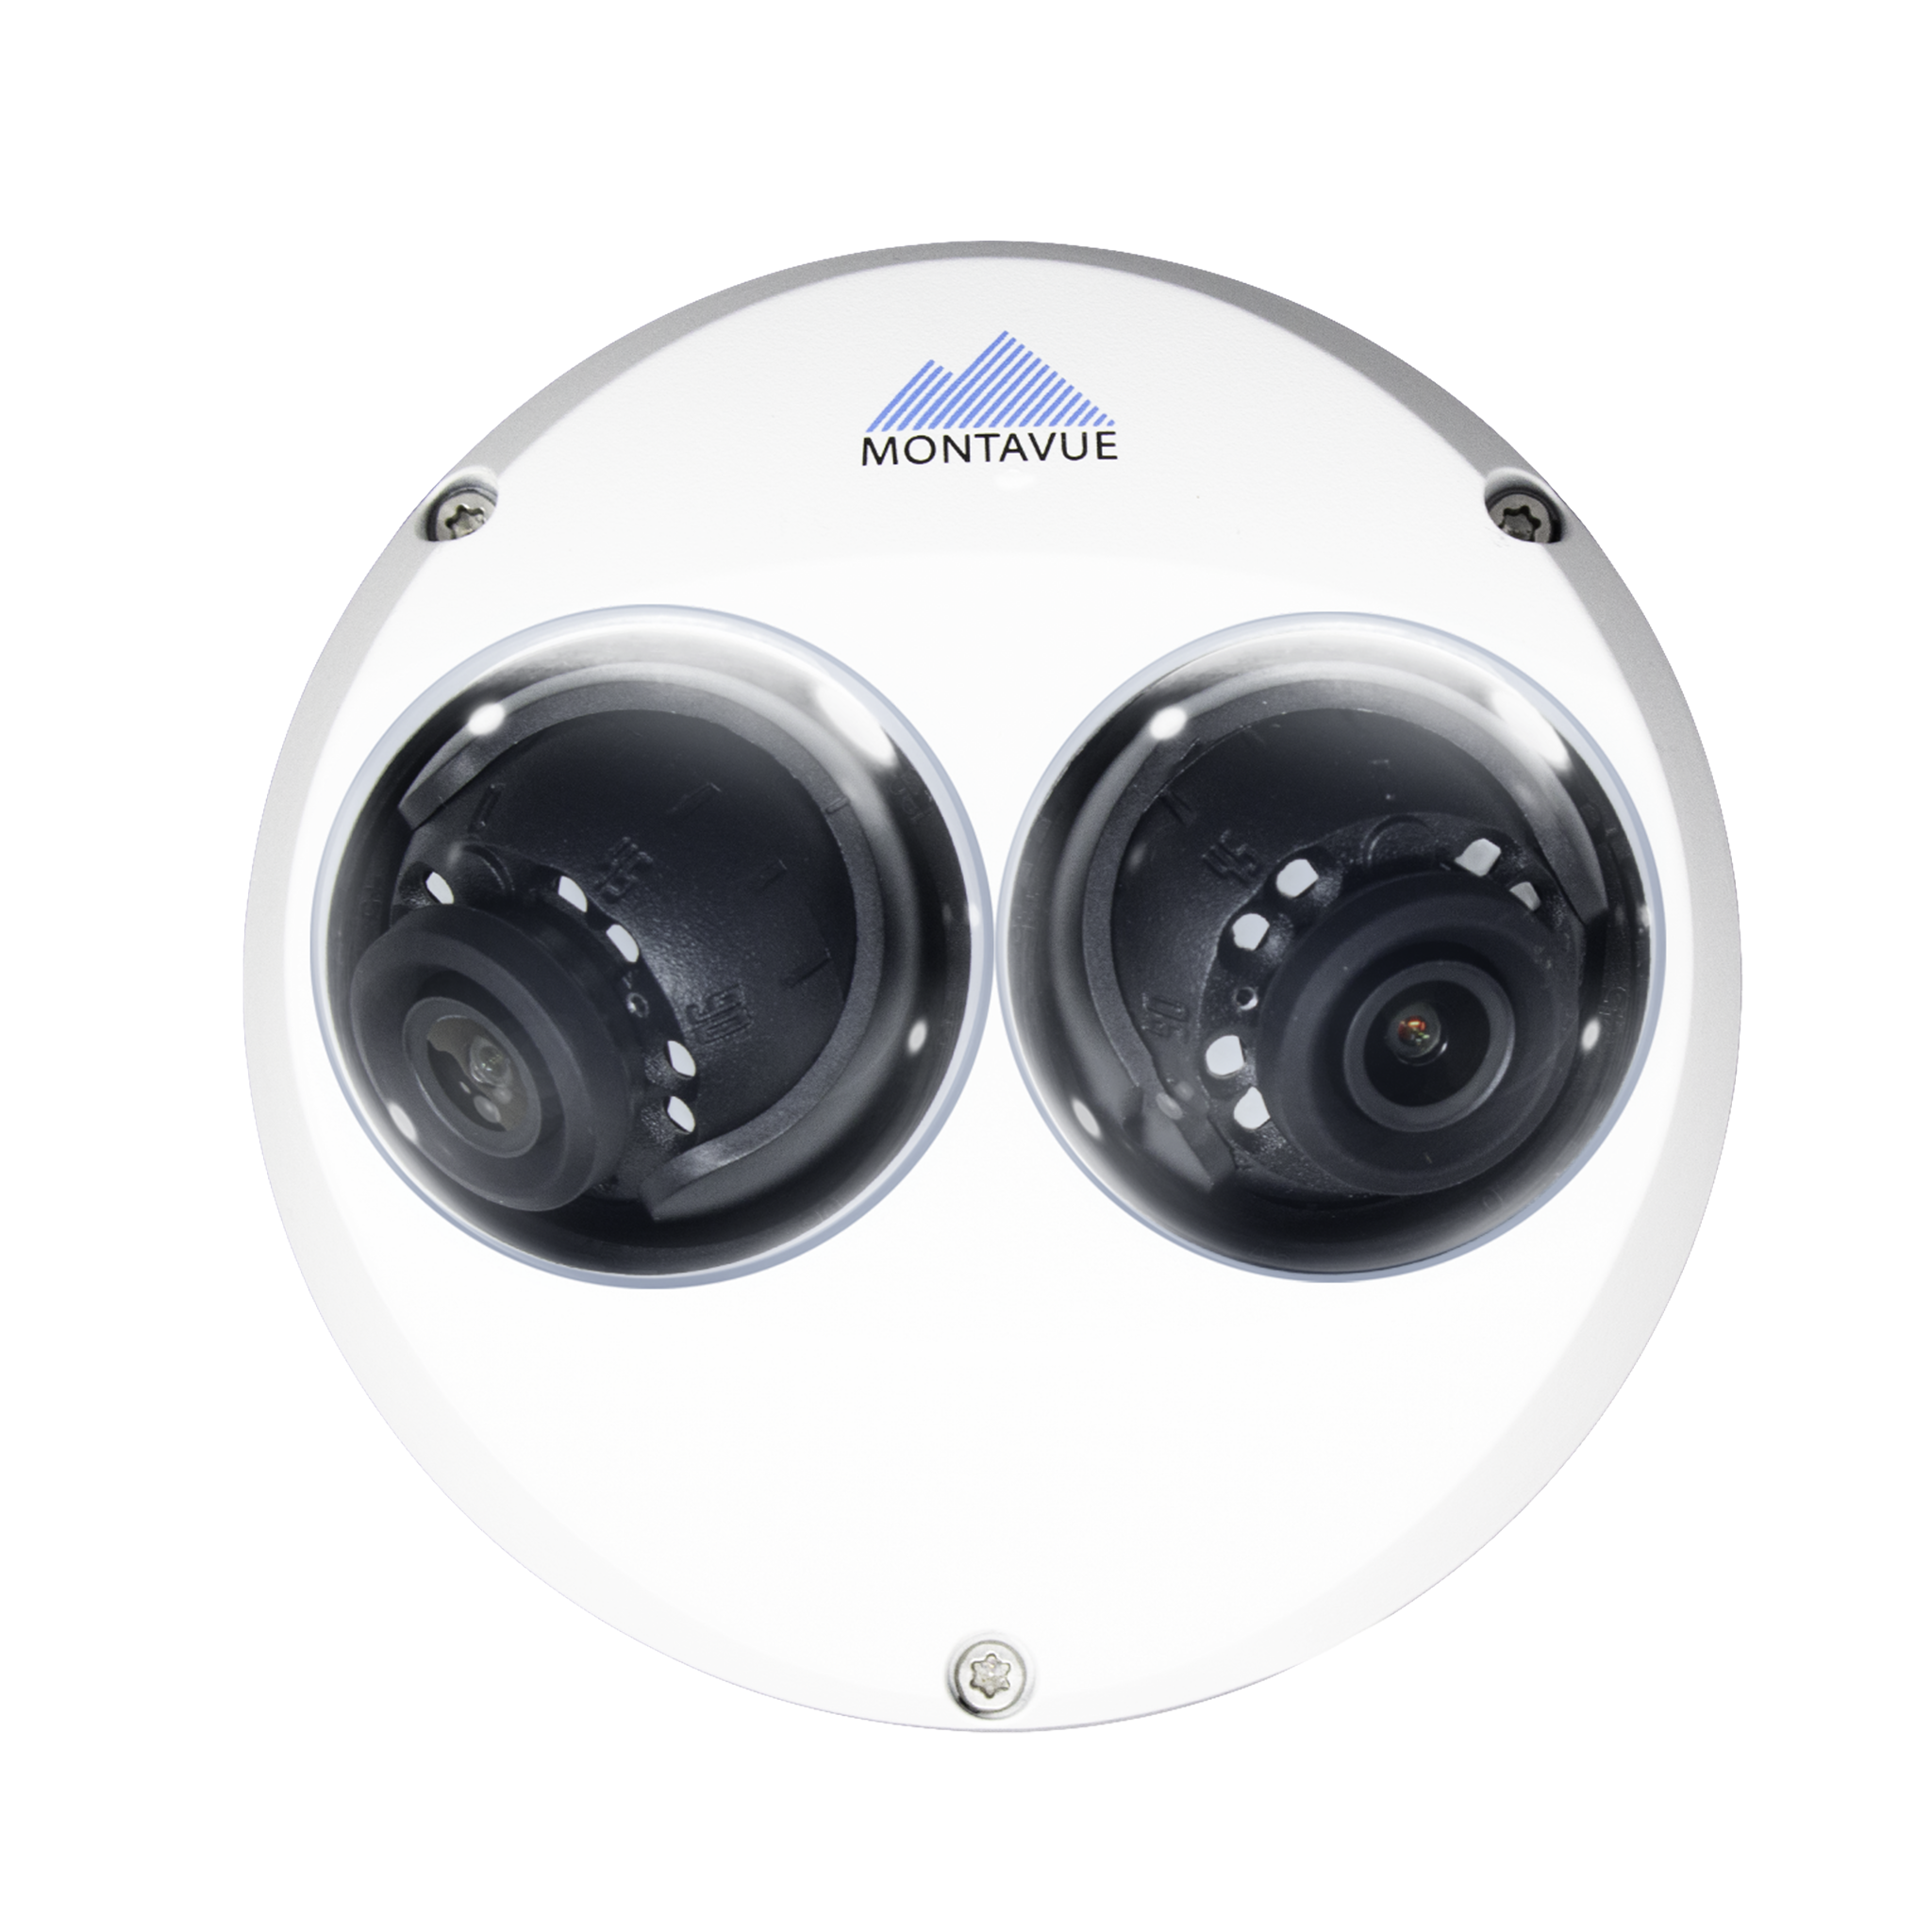 4MP Dual-Directional Dome Network Camera - MT2D4-IR-AI-SMD3-W - Montavue